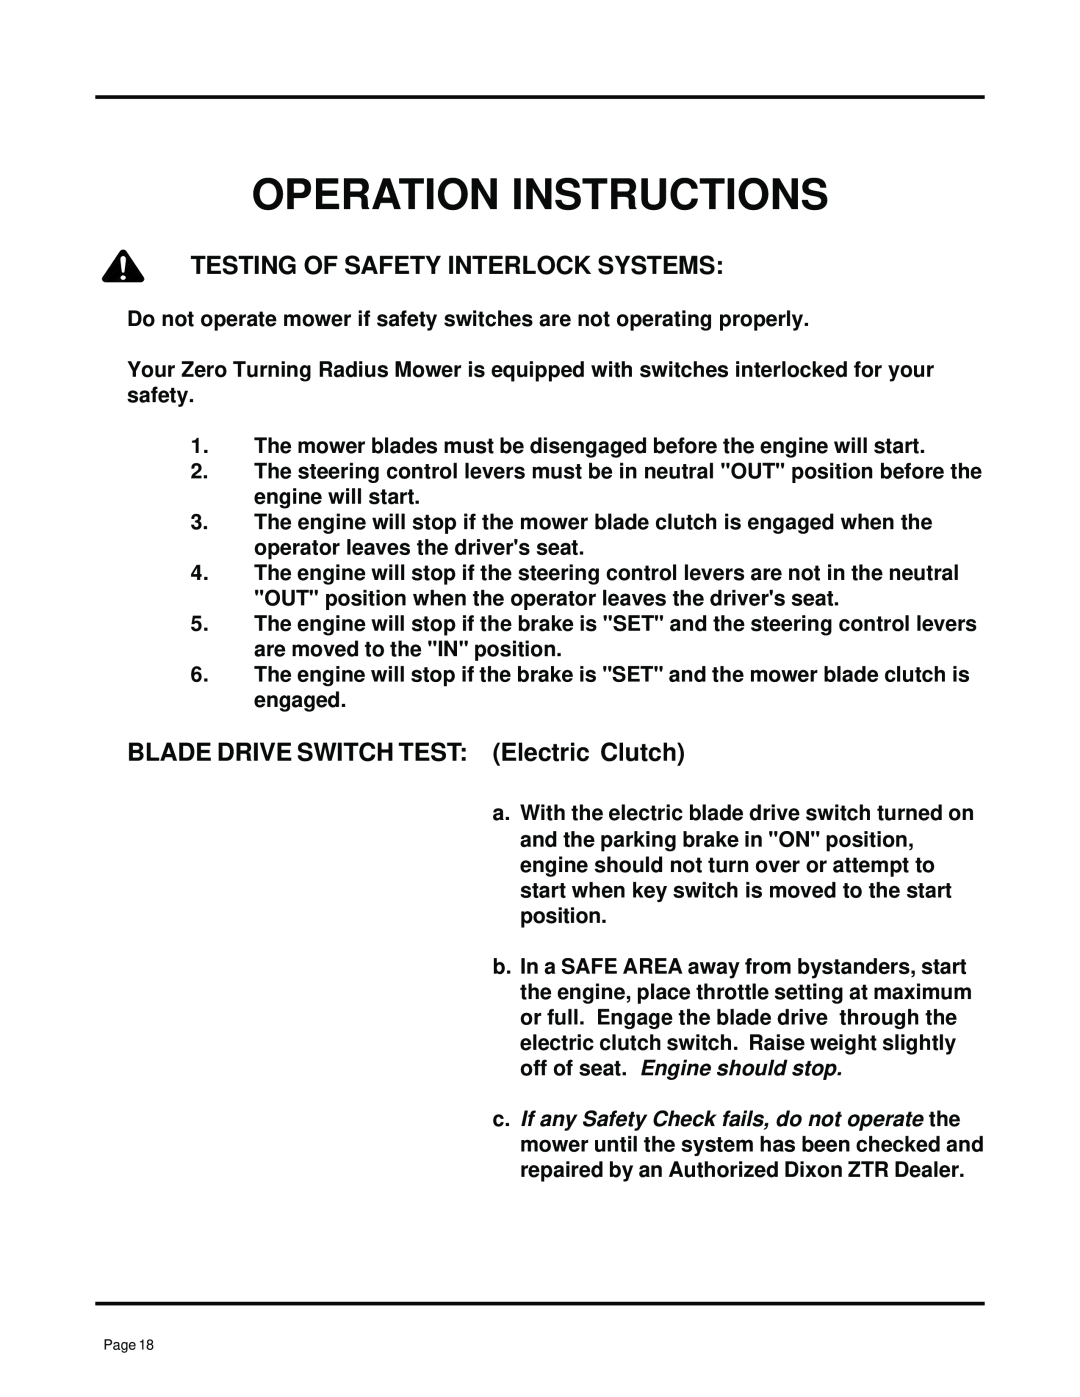 Dixon ZTR 7025 manual Operation Instructions, Testing Of Safety Interlock Systems, BLADE DRIVE SWITCH TEST Electric Clutch 